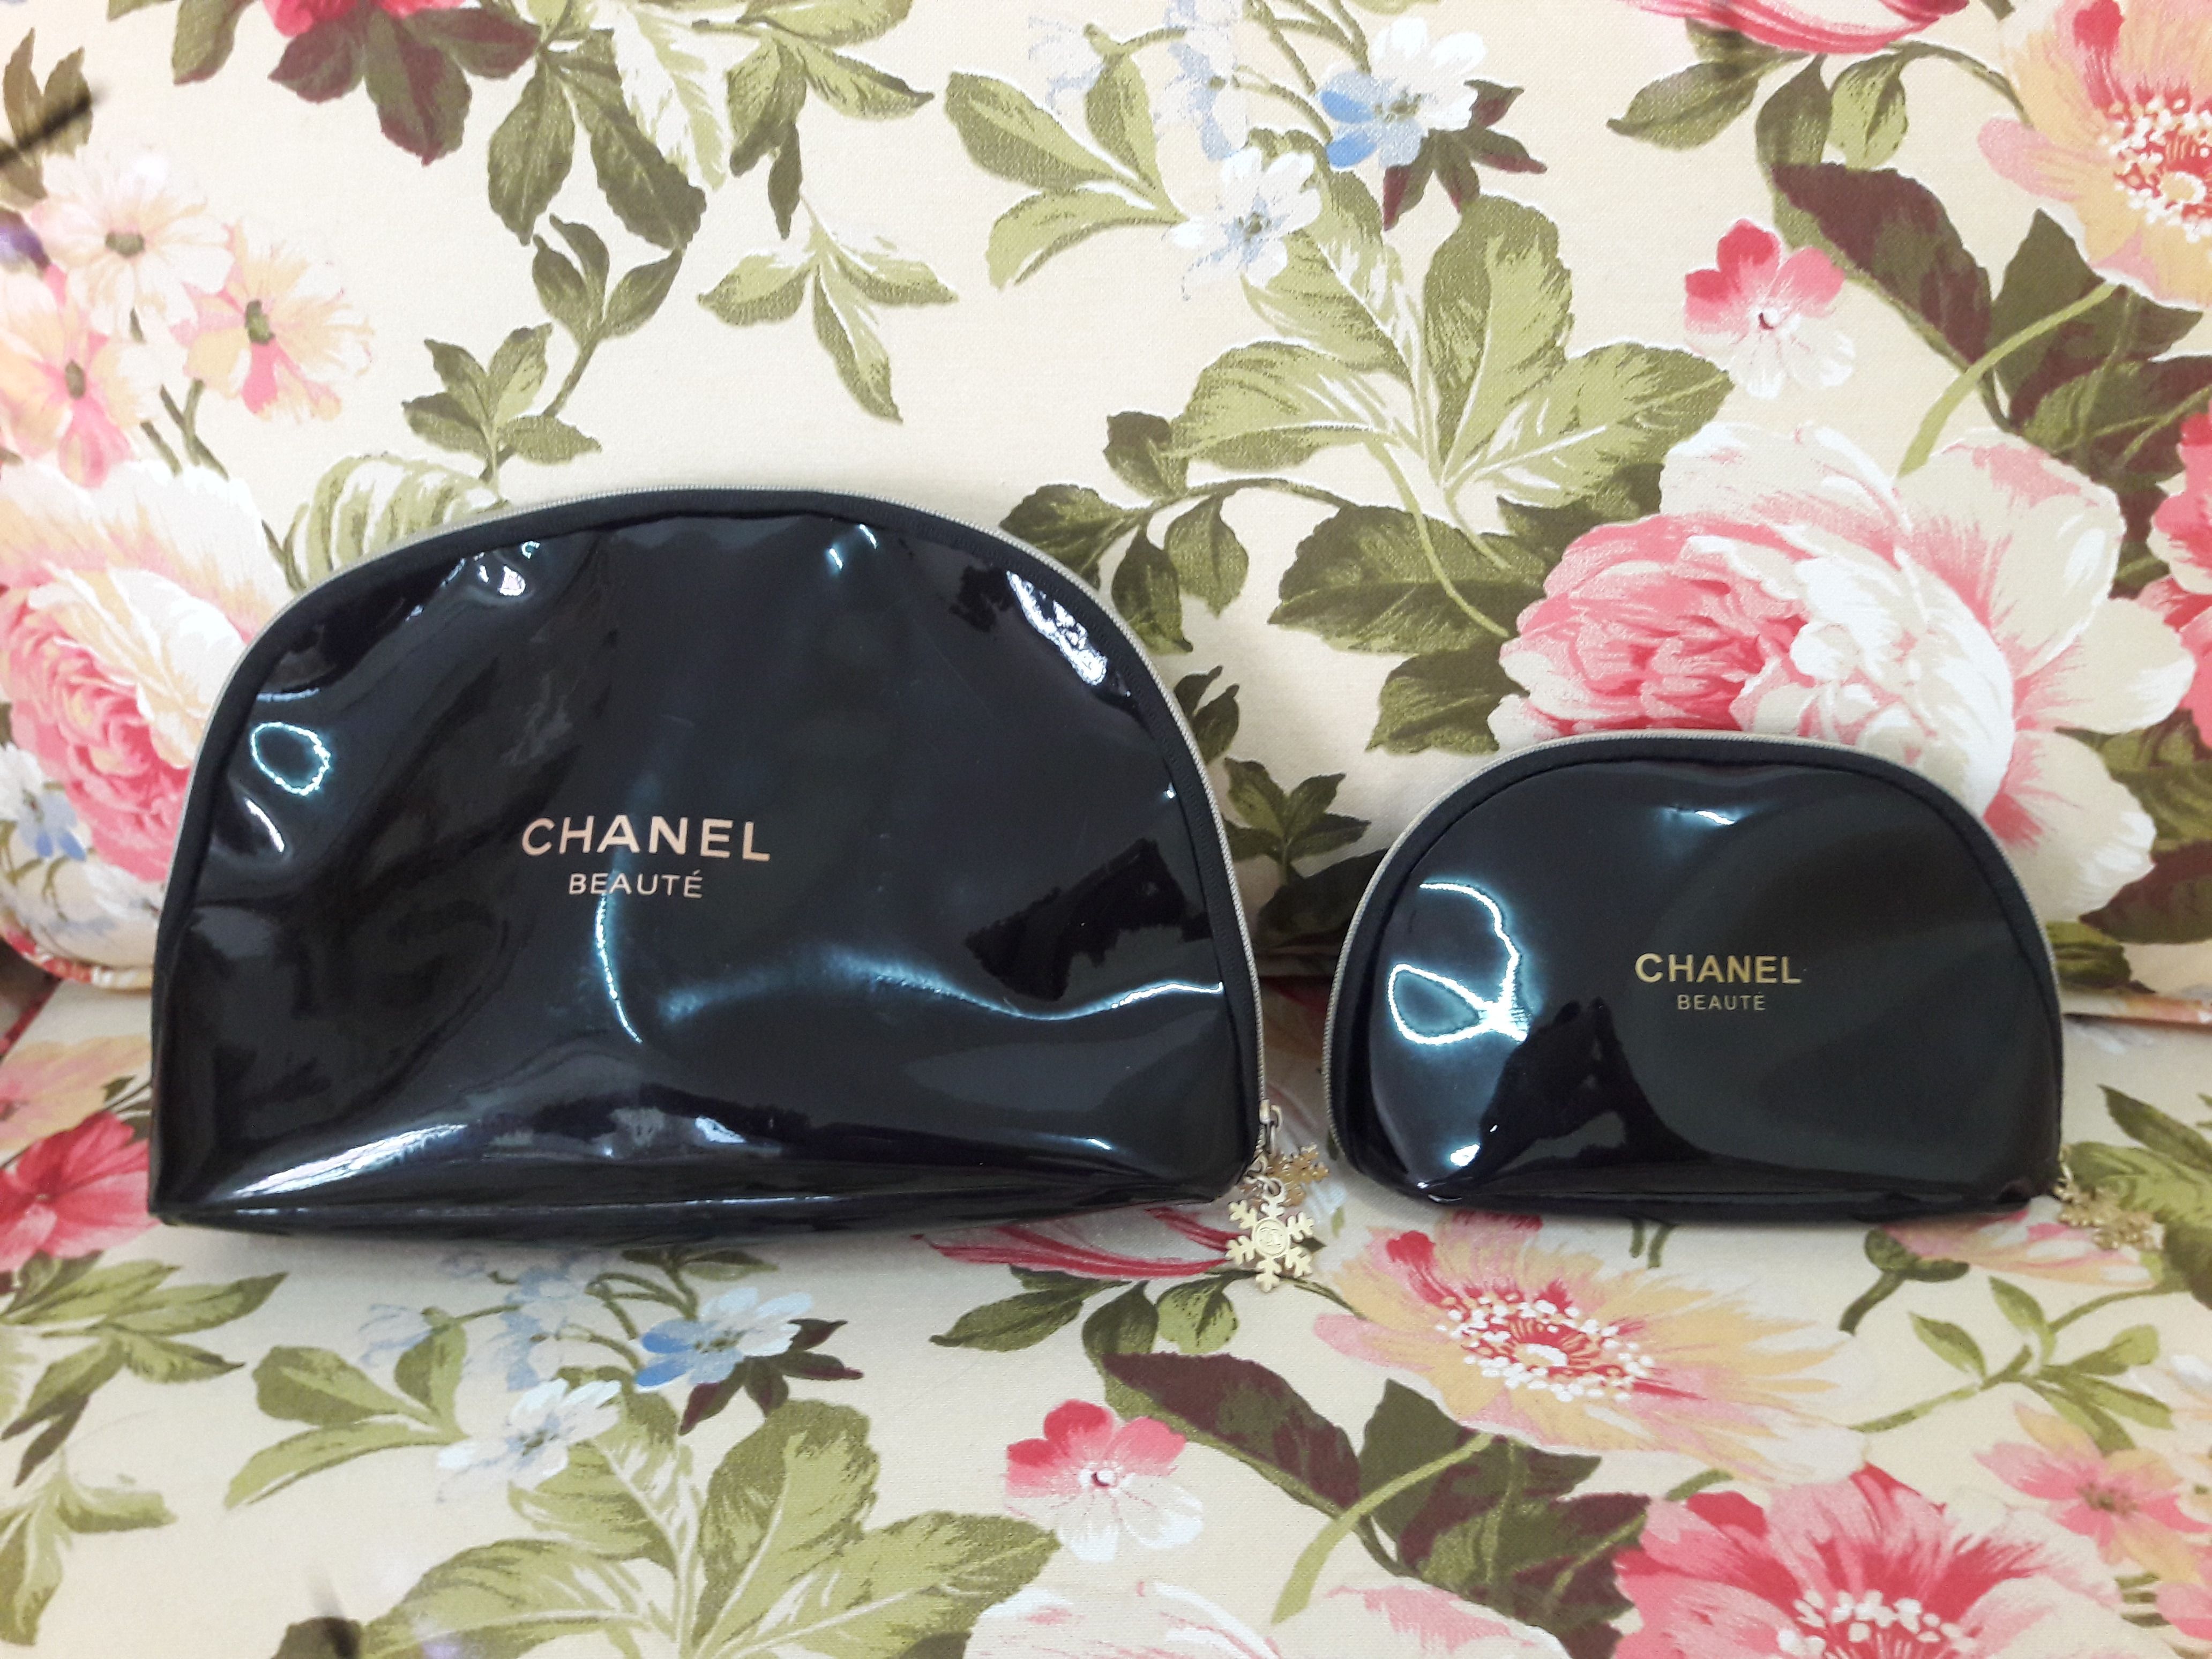 Chanel Chanel Beaute Cosmetic Bag